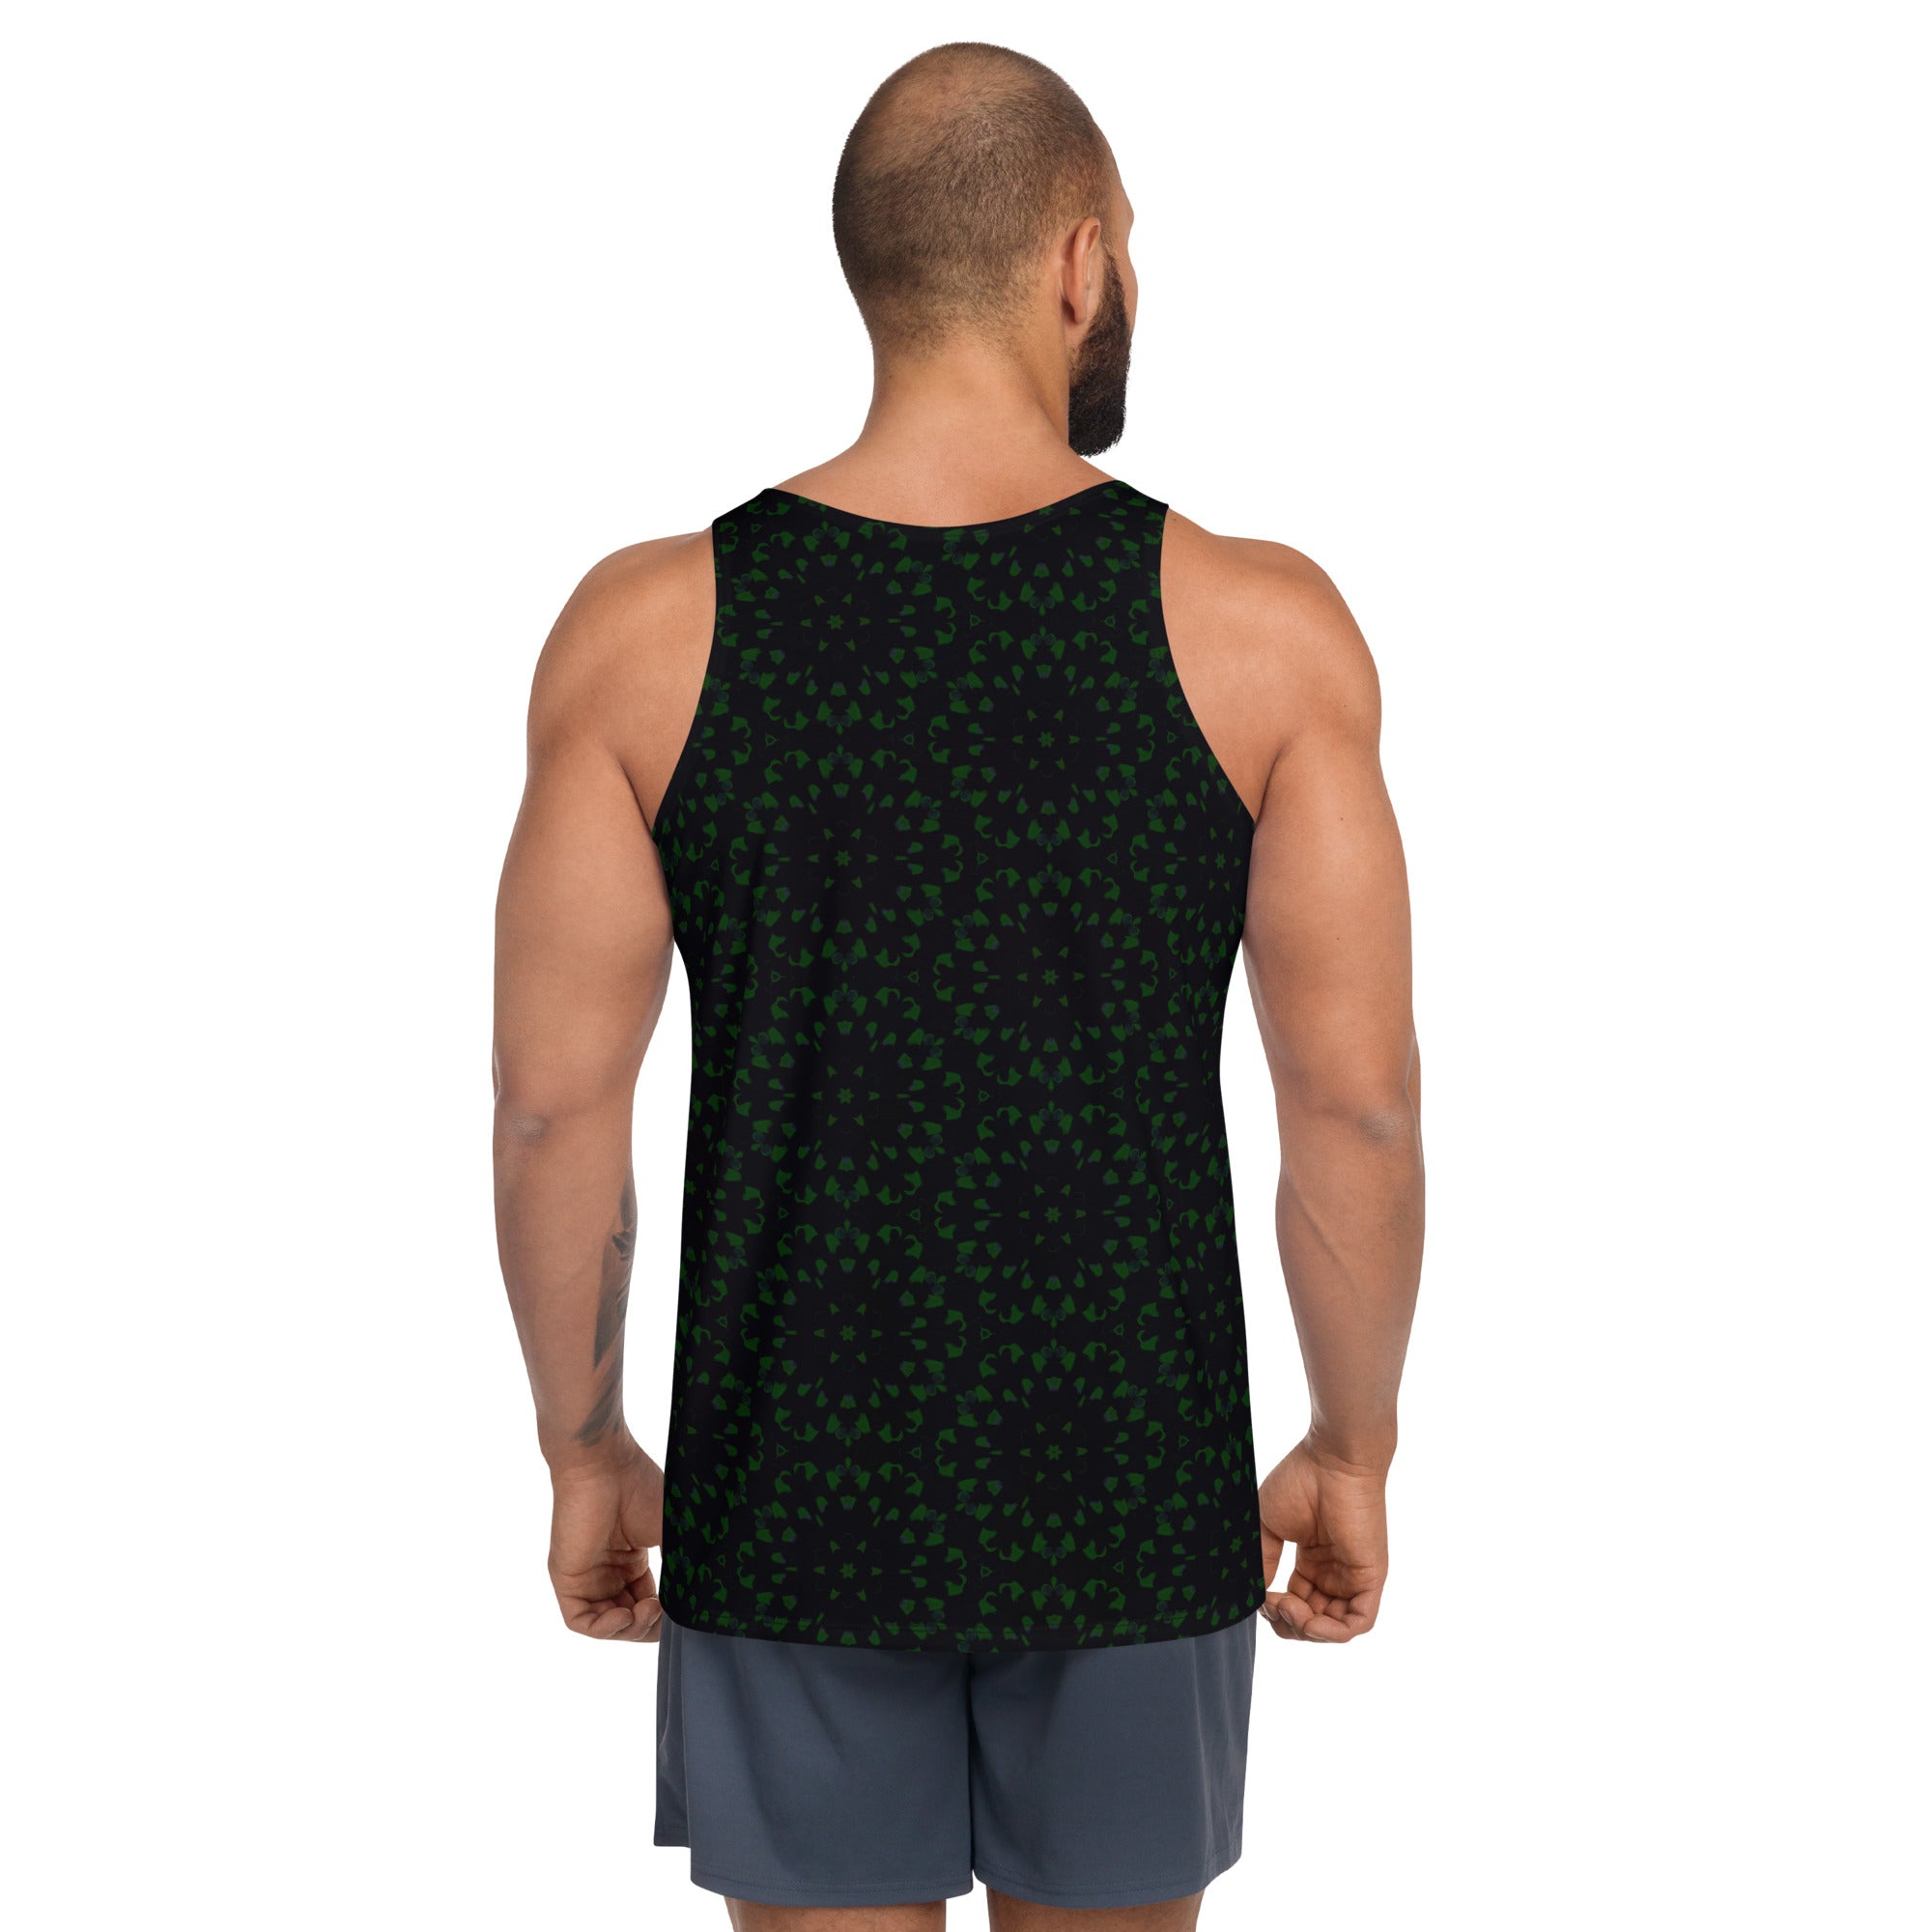 Back view of Meadow Muse Men's Tank Top highlighting design details